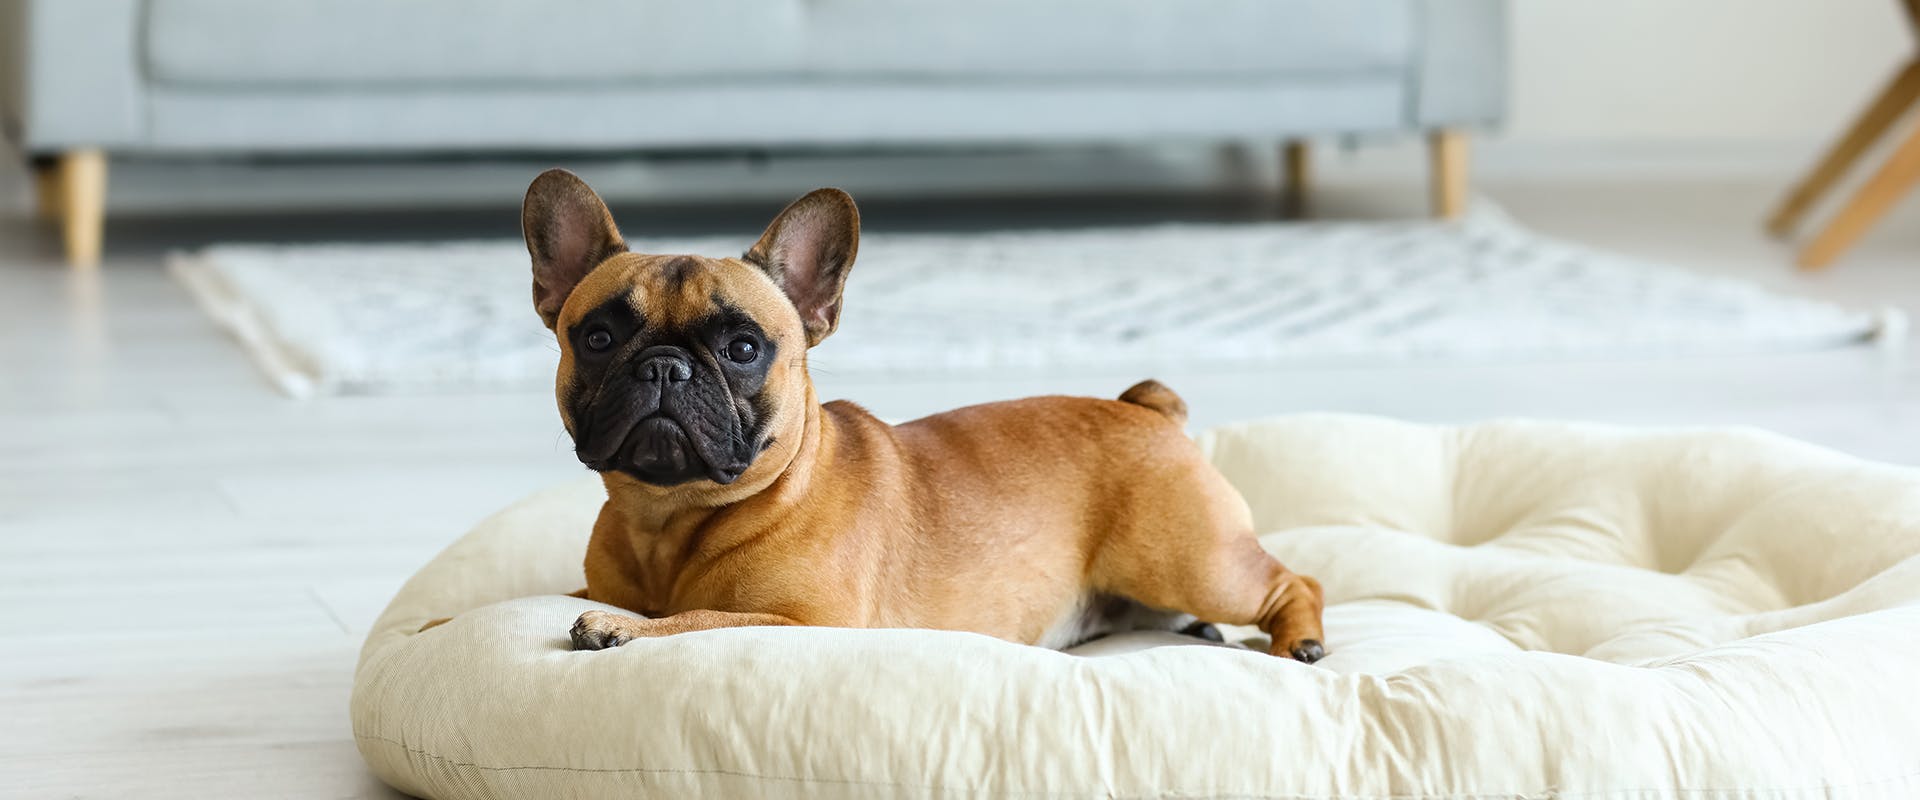 A French Bulldog sitting on a large dog bed in a living room